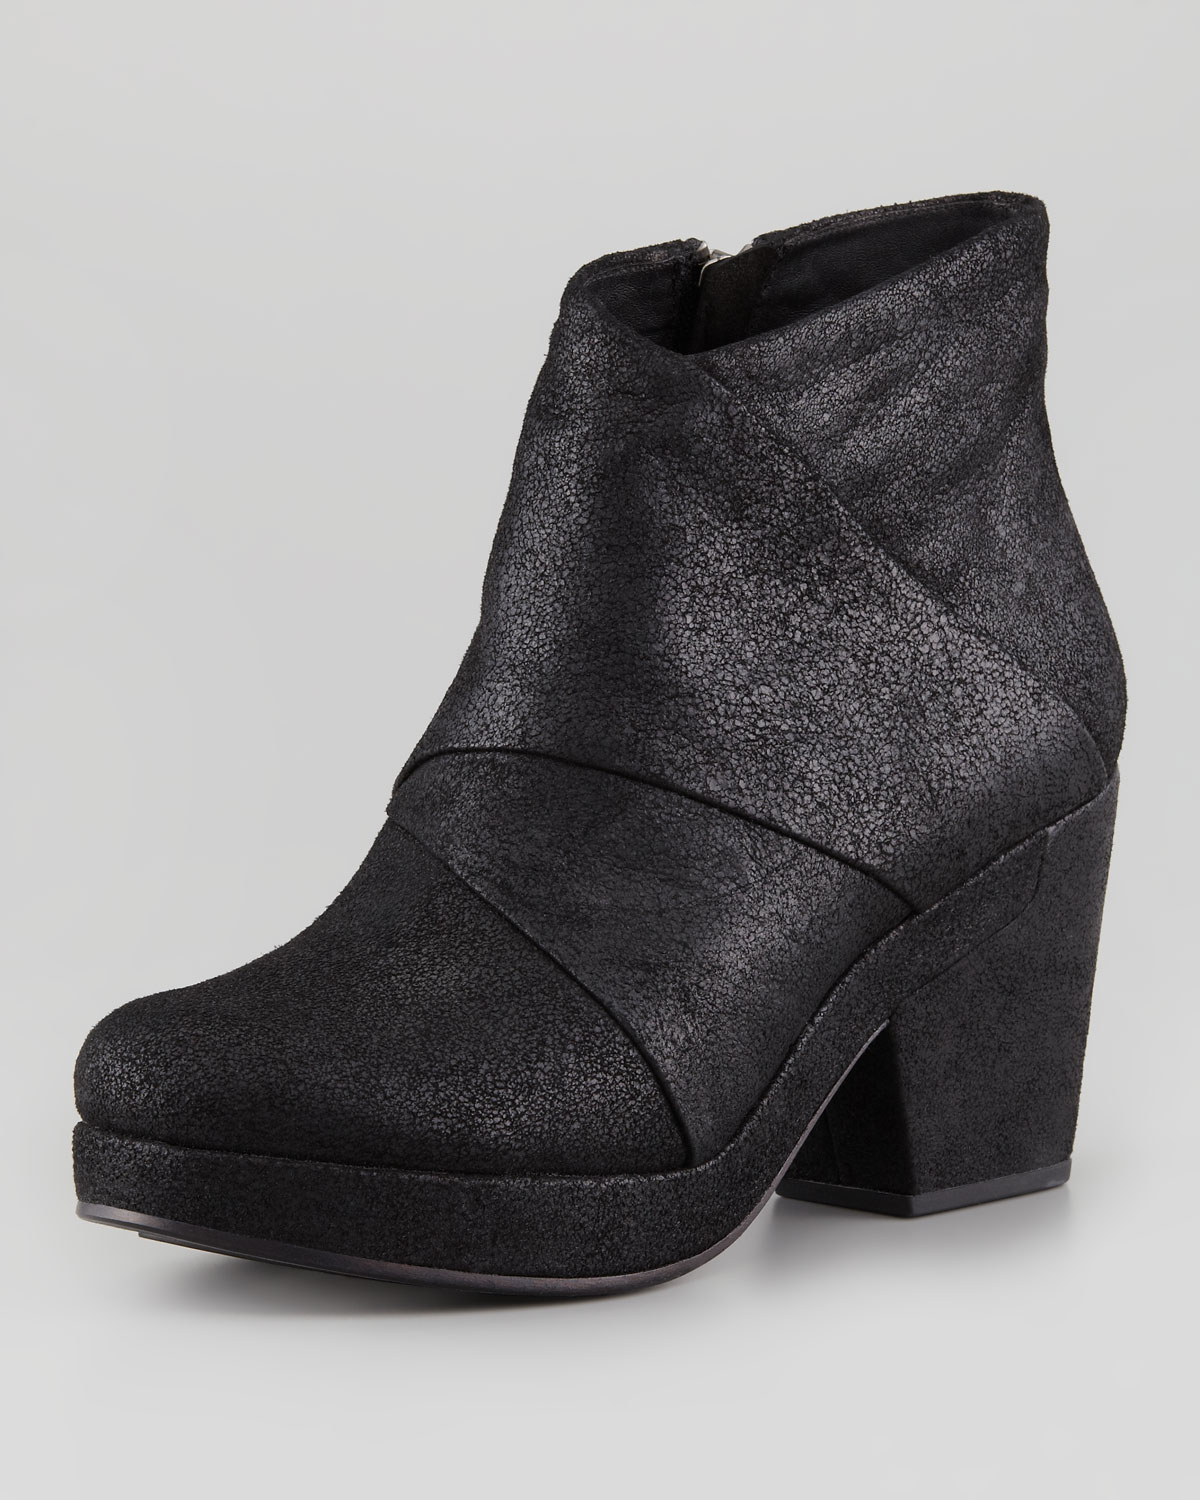 Eileen Fisher Coax Leather Bootie in Black (Gray) - Lyst